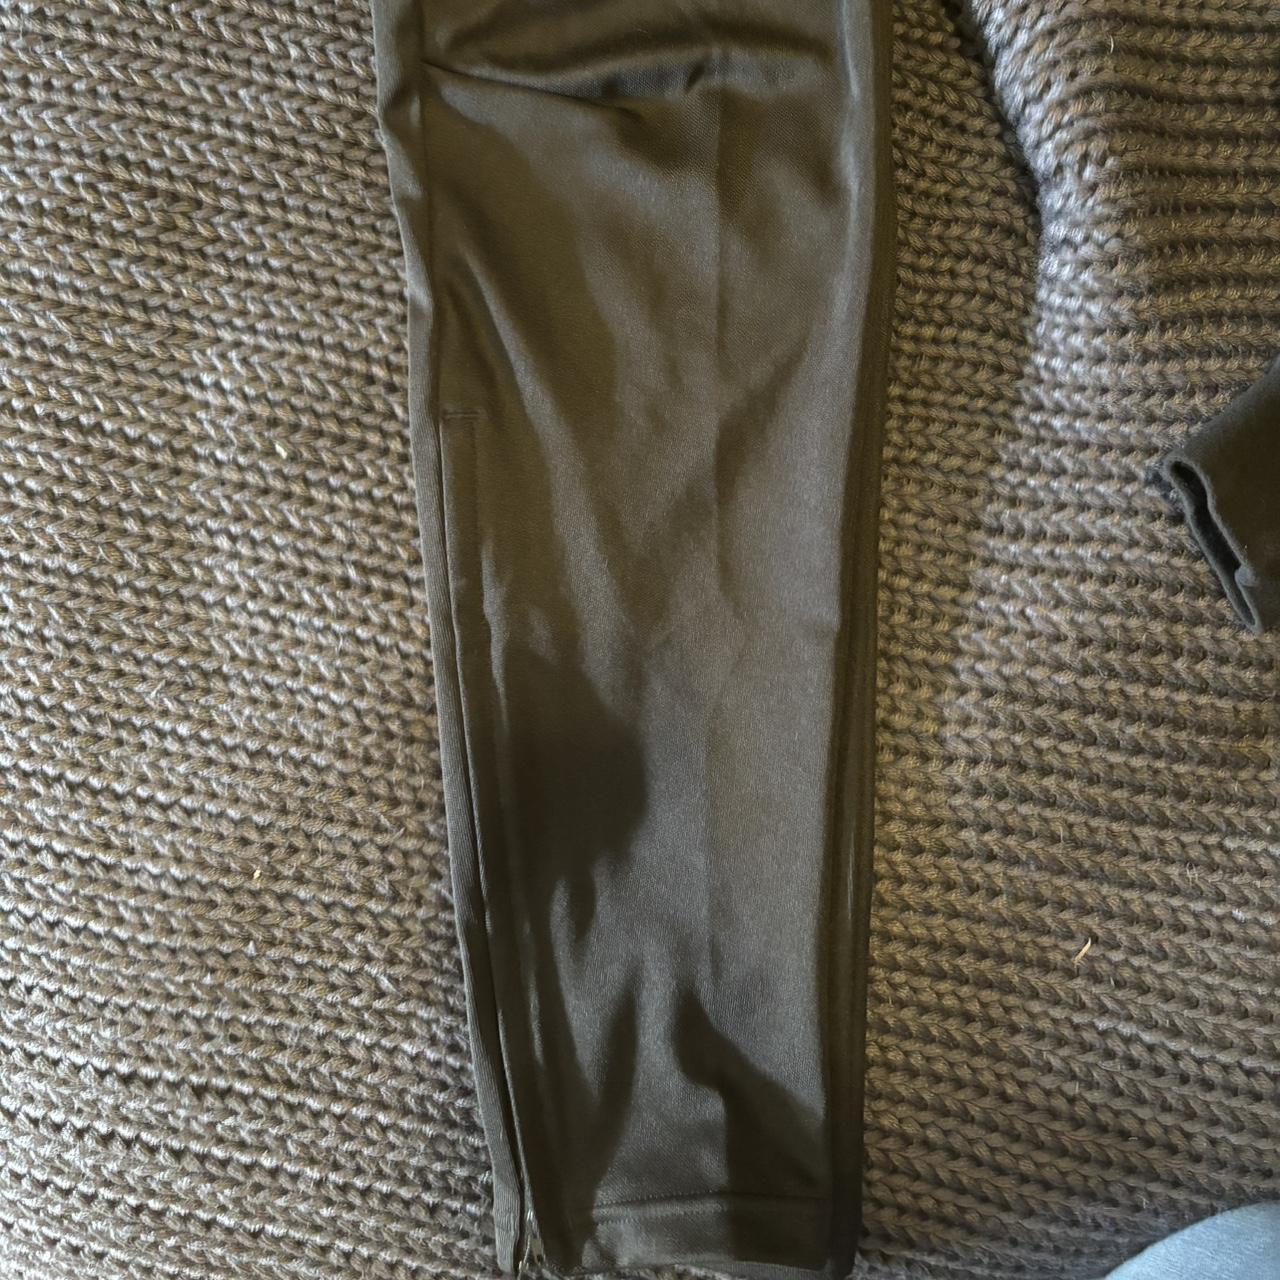 Adidas trainer pants with side zipper - Depop